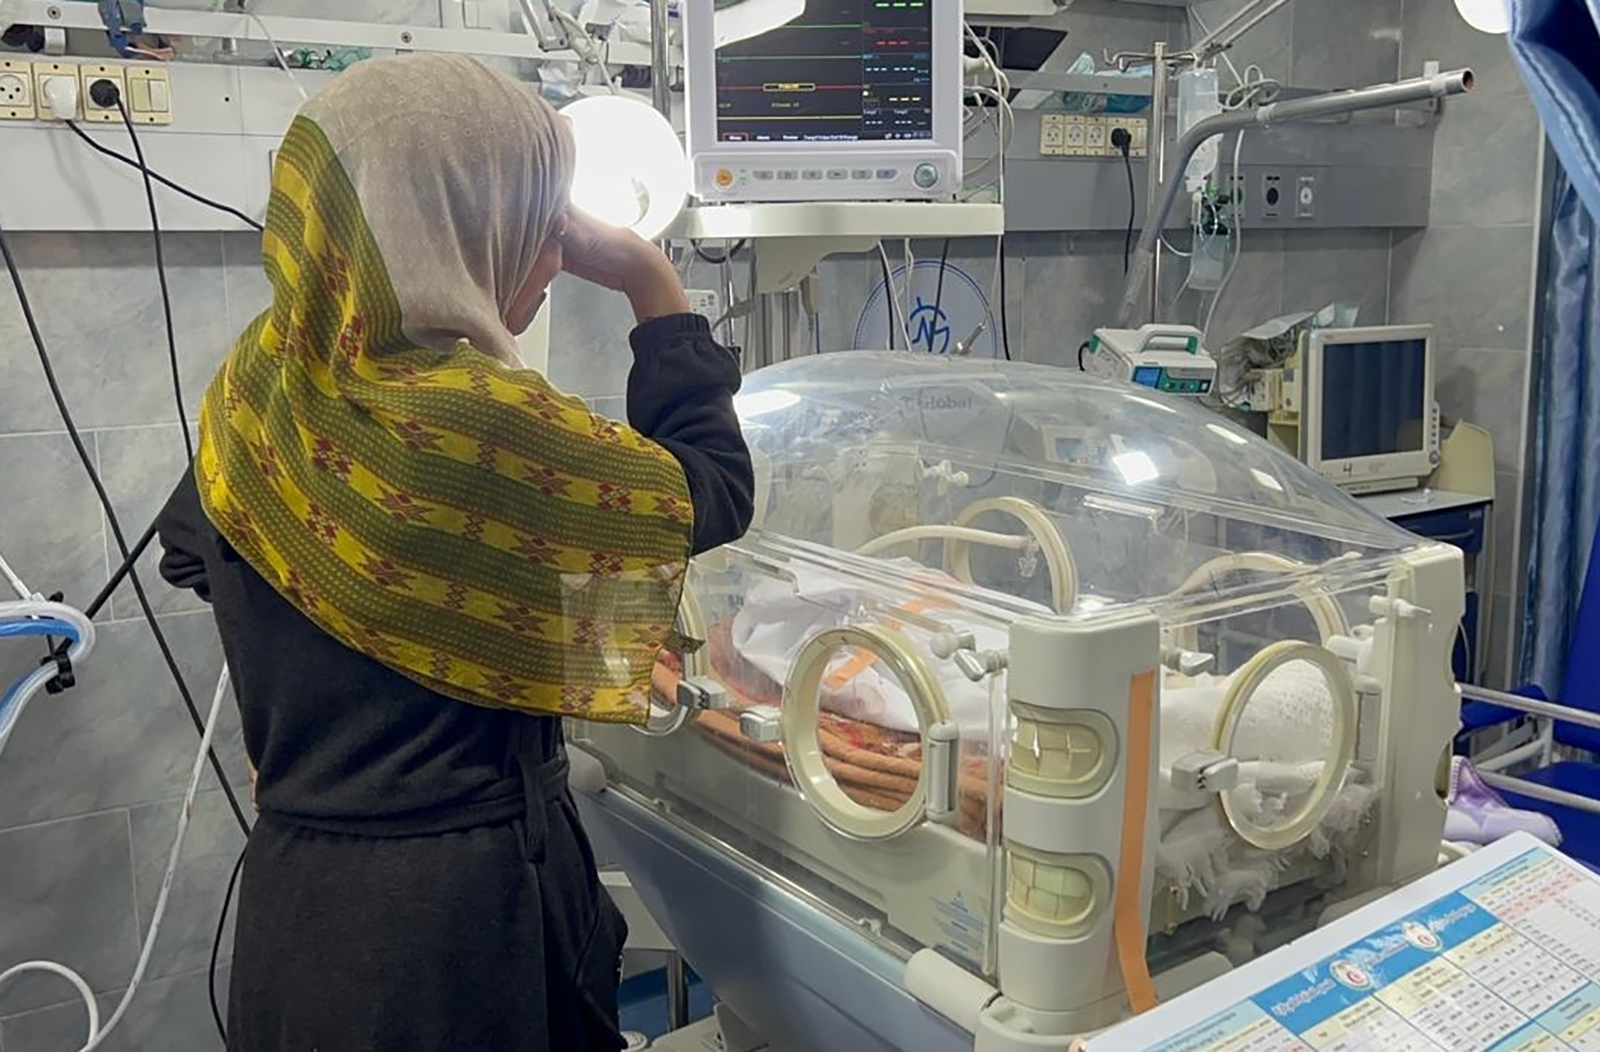 A mother mourns the death of her infant beside an incubator at Kamal Adwan Hospital in Beit Lahia, Gaza, on February 29.